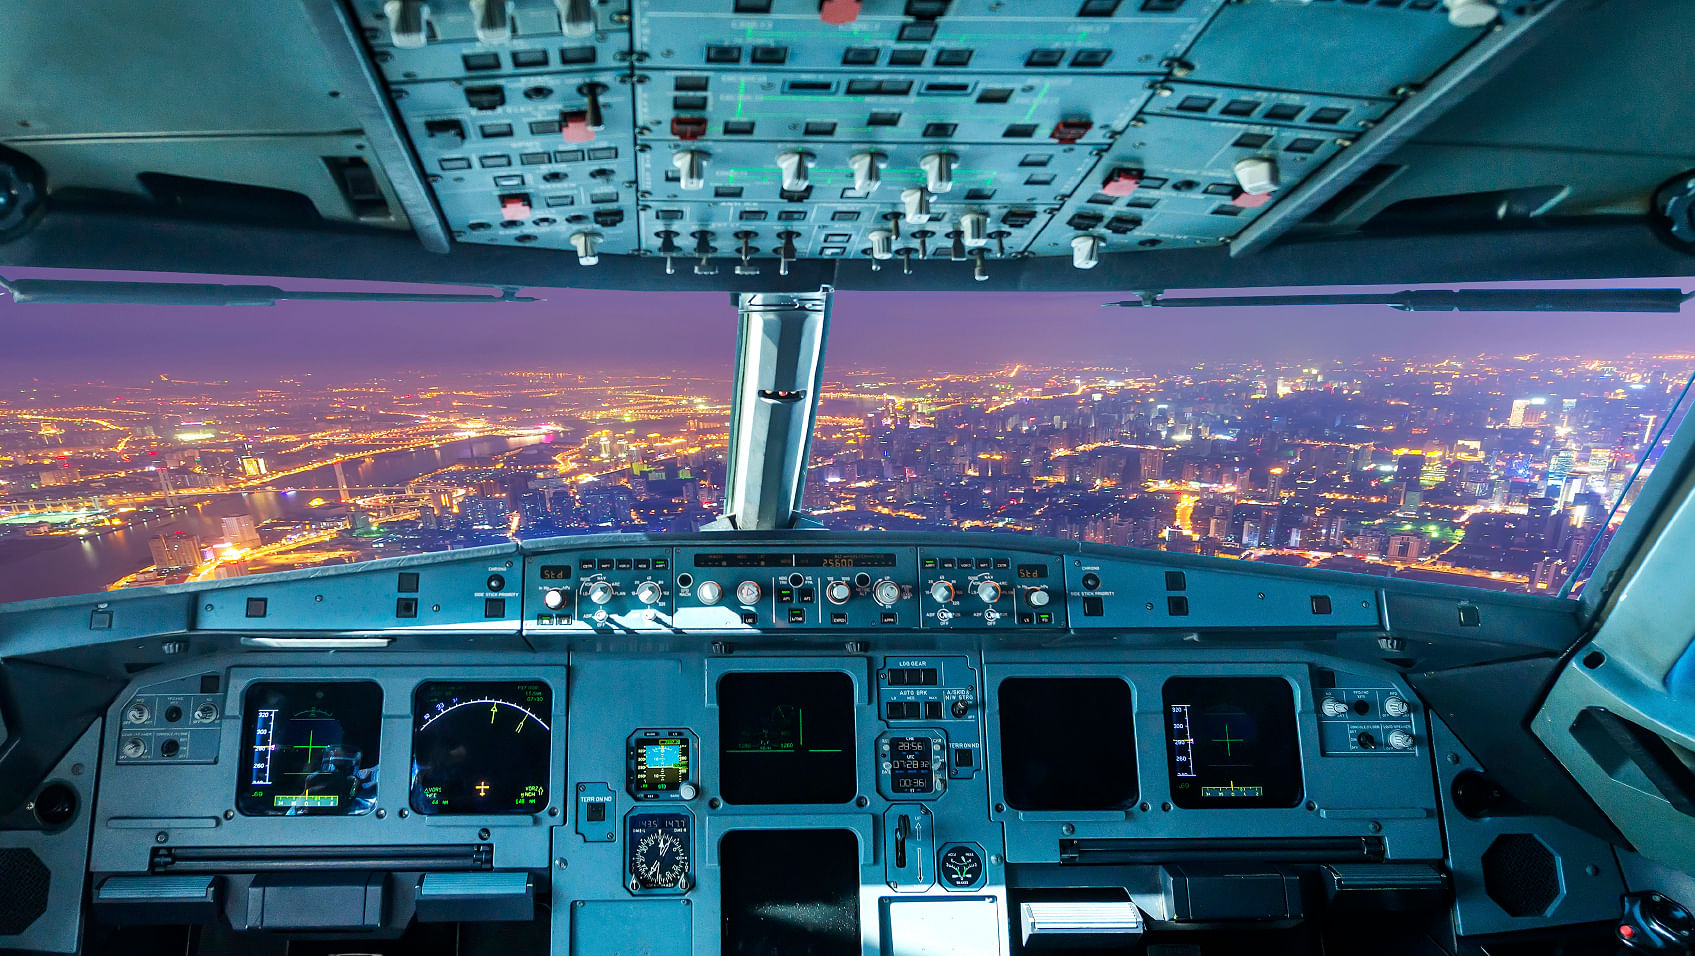 No passenger flights yet are fully automated, but it is only a matter of time. (Photo: iStock)